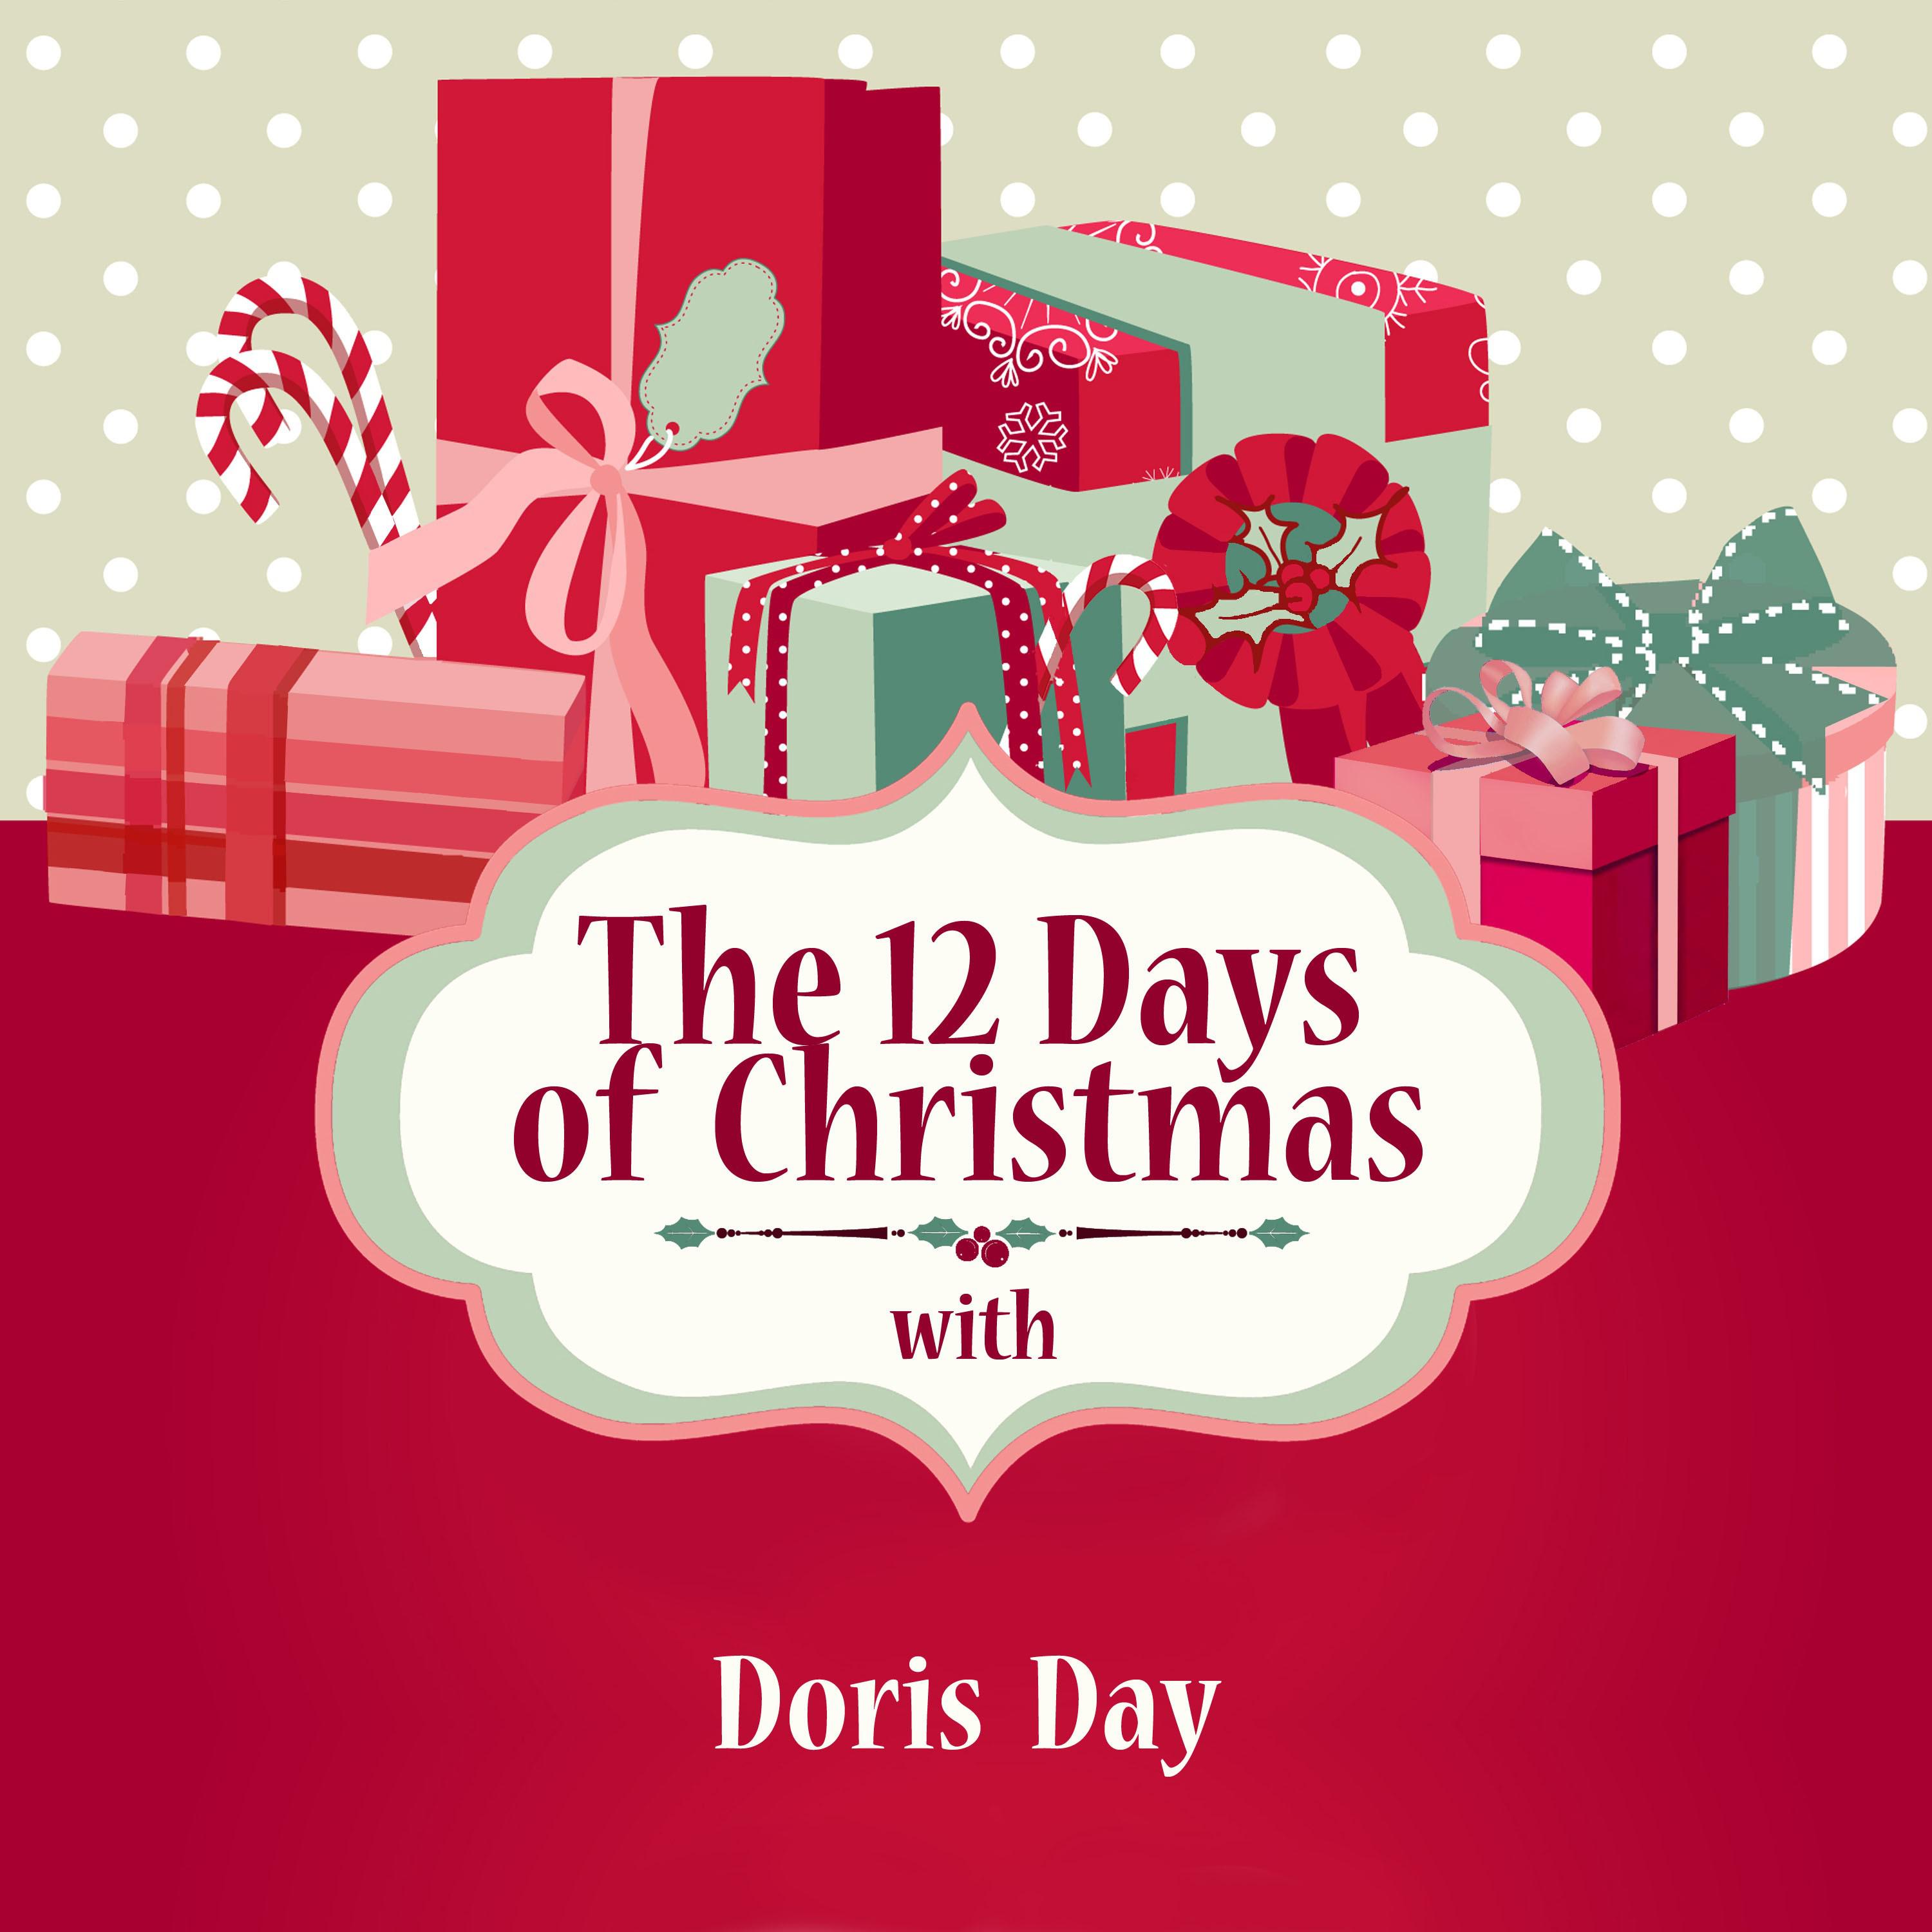 The 12 Days of Christmas with Doris Day